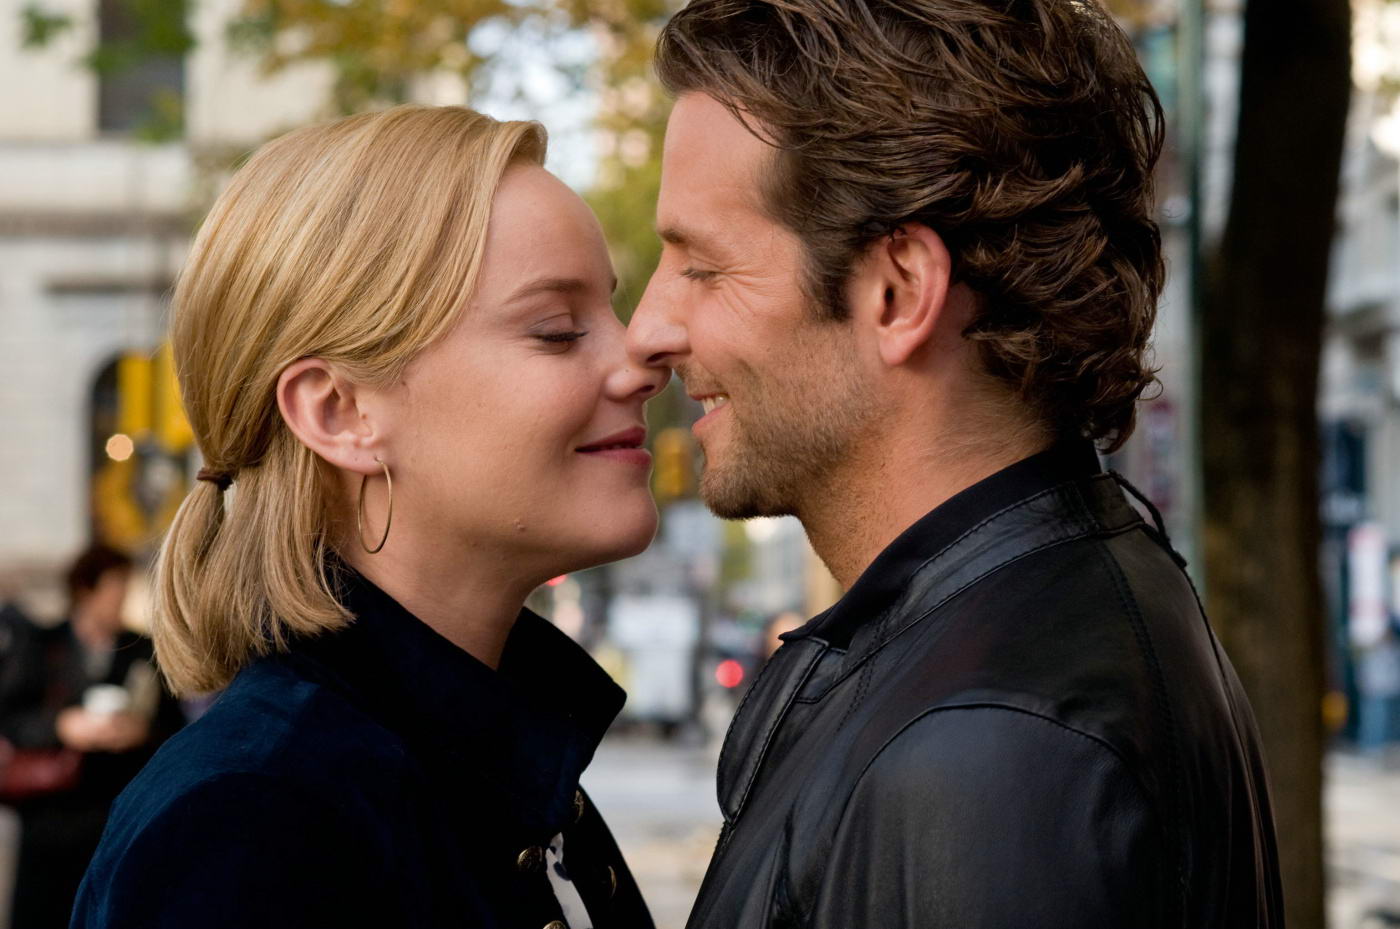 Abbie Cornish as Lindy and Bradley Cooper as Eddie Morra in Limitless